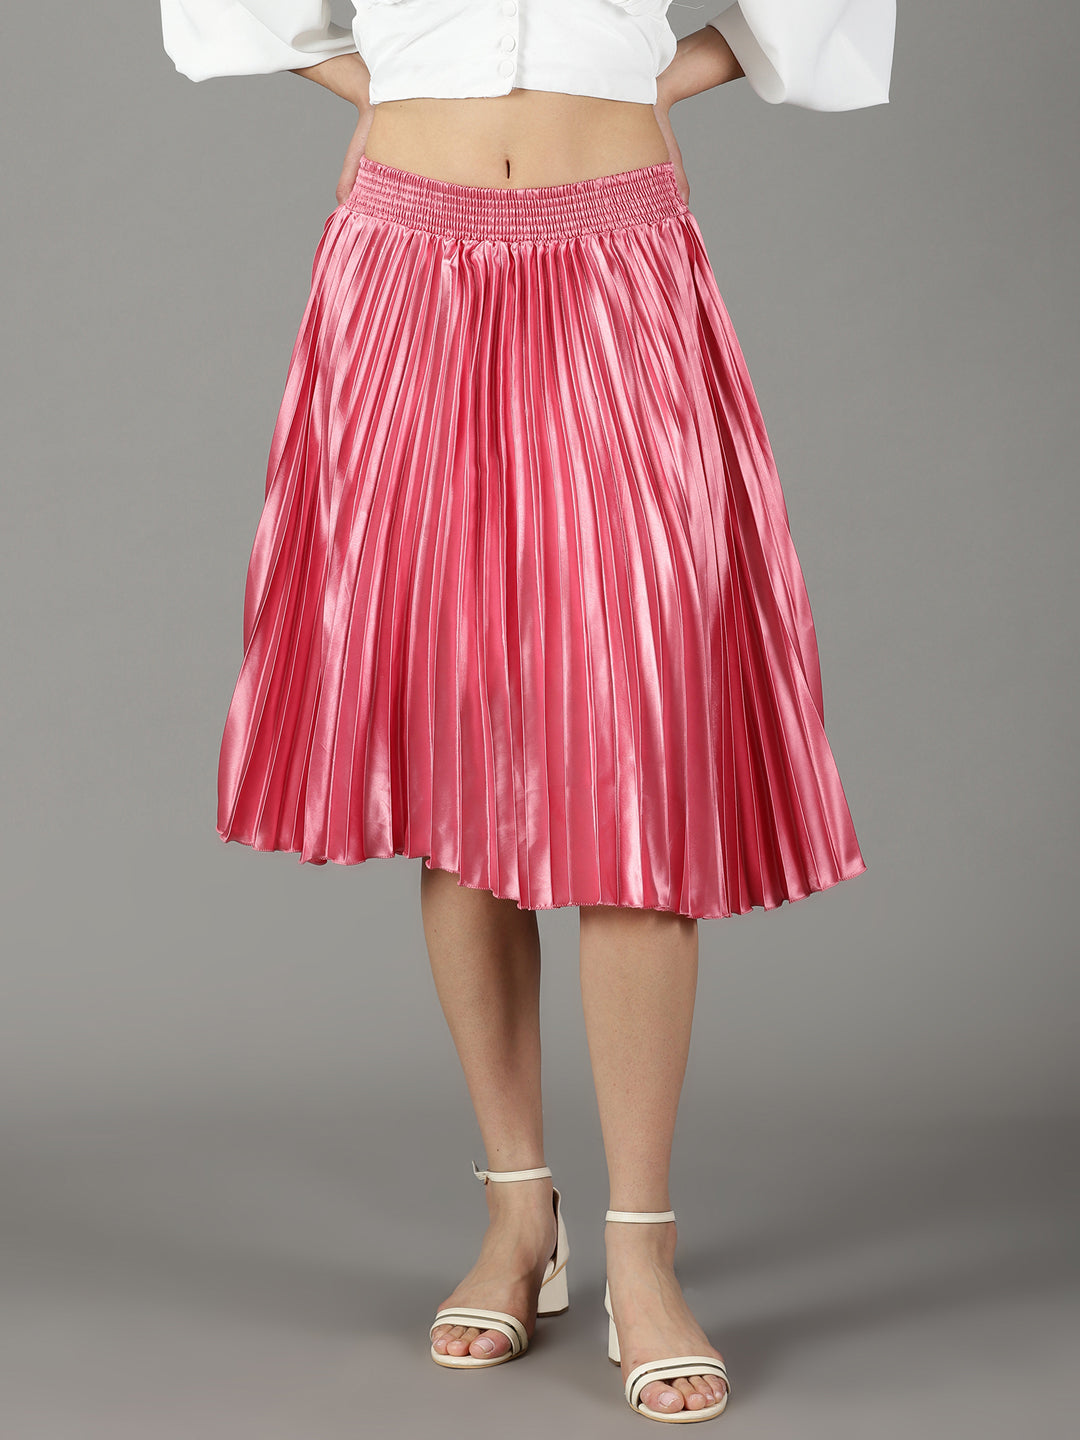 Women's Pink Solid Flared Skirt